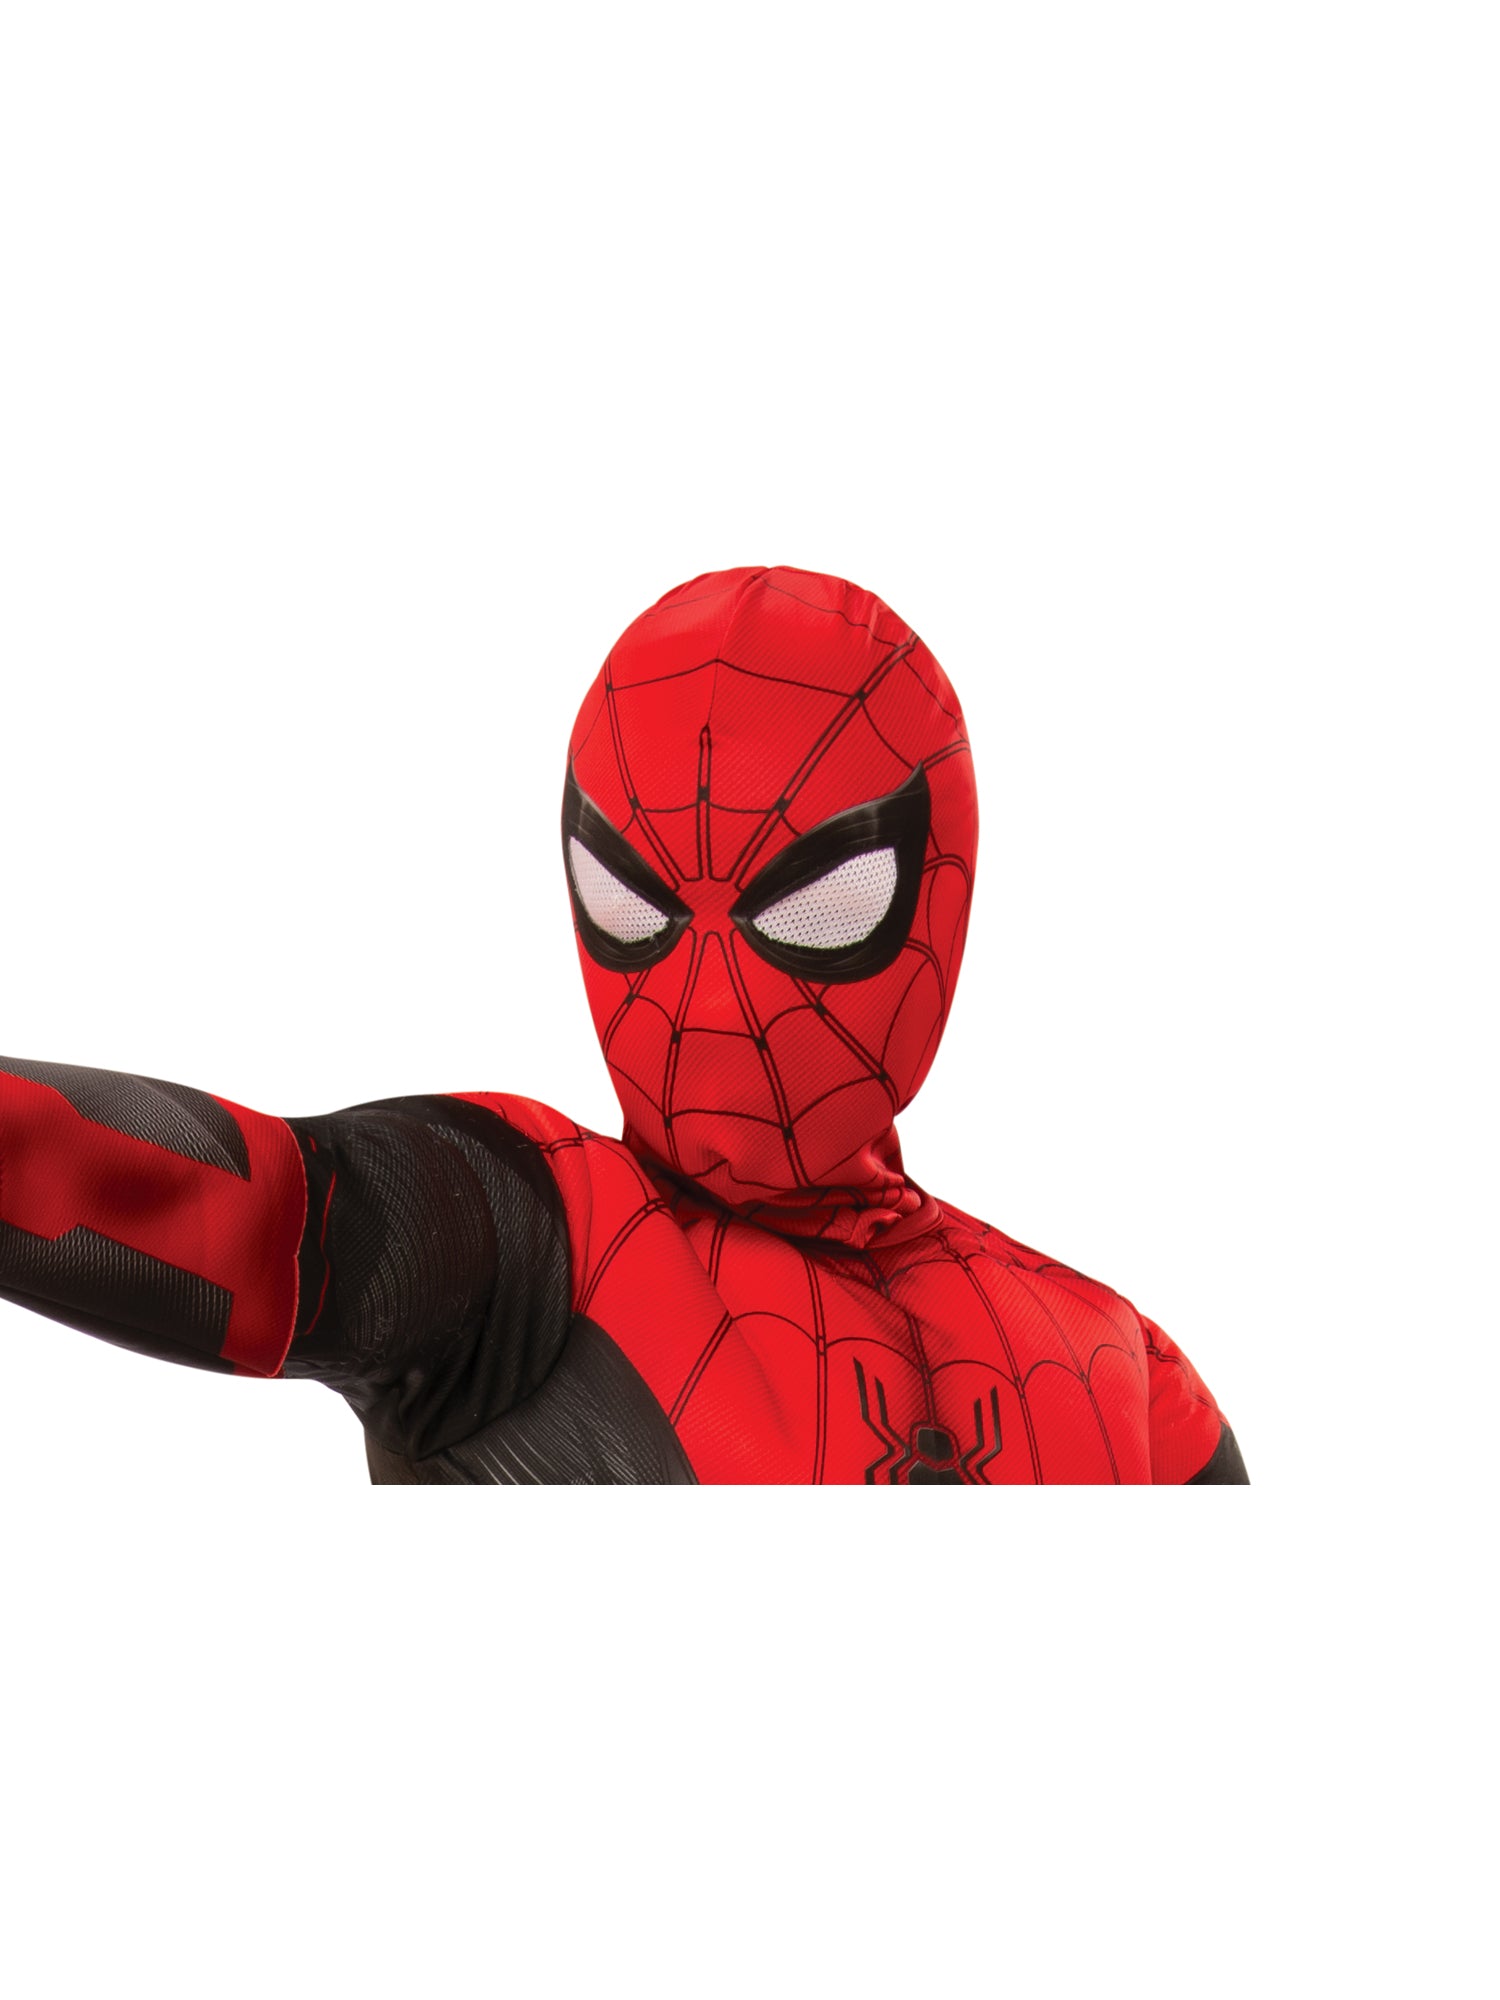 Spider-Man, Infinity War, Avengers, Infinity War, Red & Black, Marvel, Mask, One Size, Front